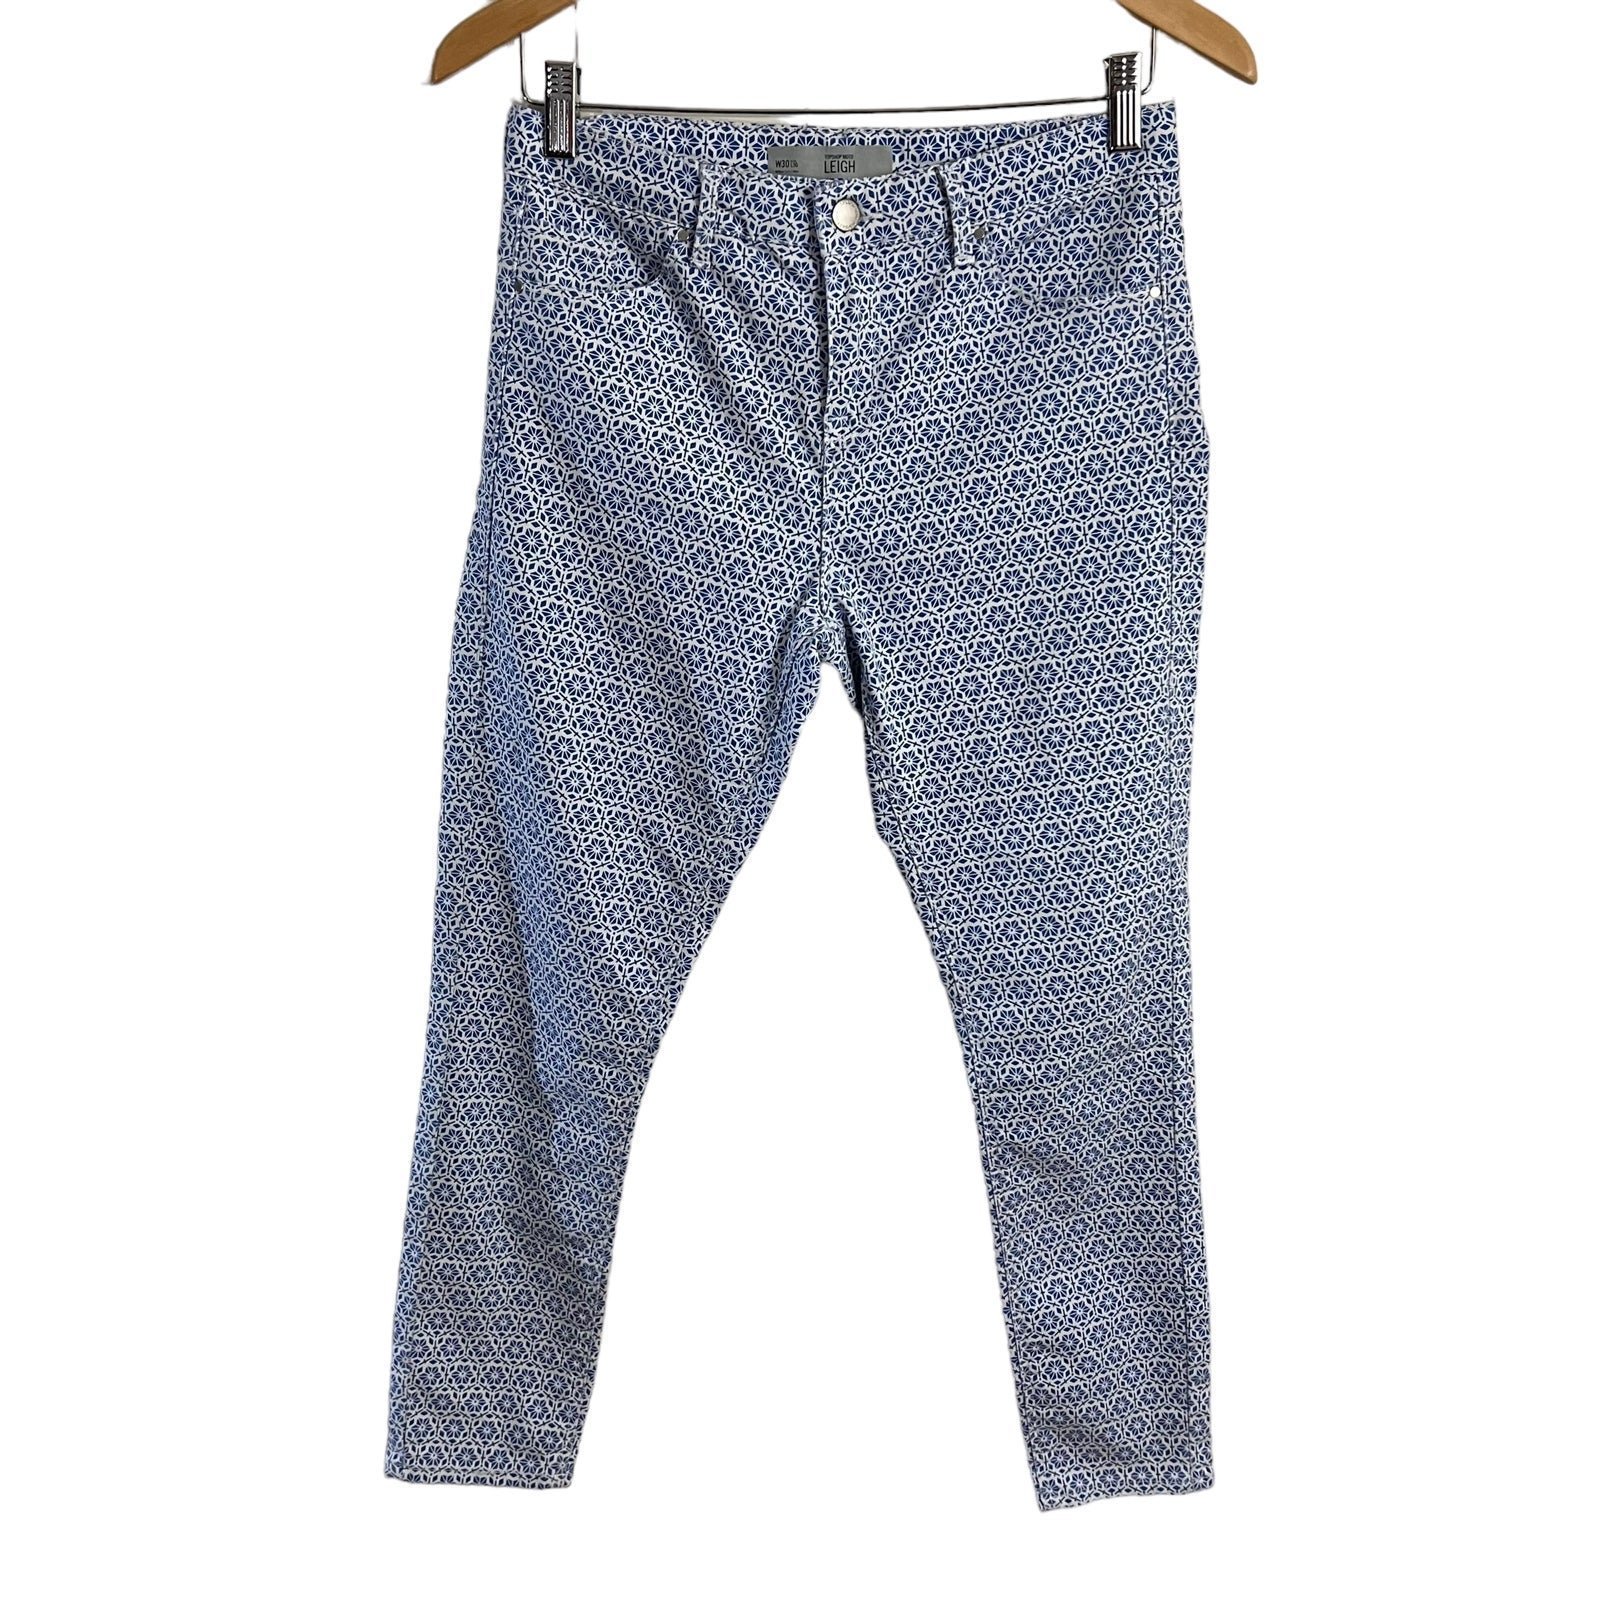 Personality TopShop Moto Leigh Pants W30 Blue and White Geometric Pattern Skinny Leg Pants KqS0RpUUp Online Exclusive